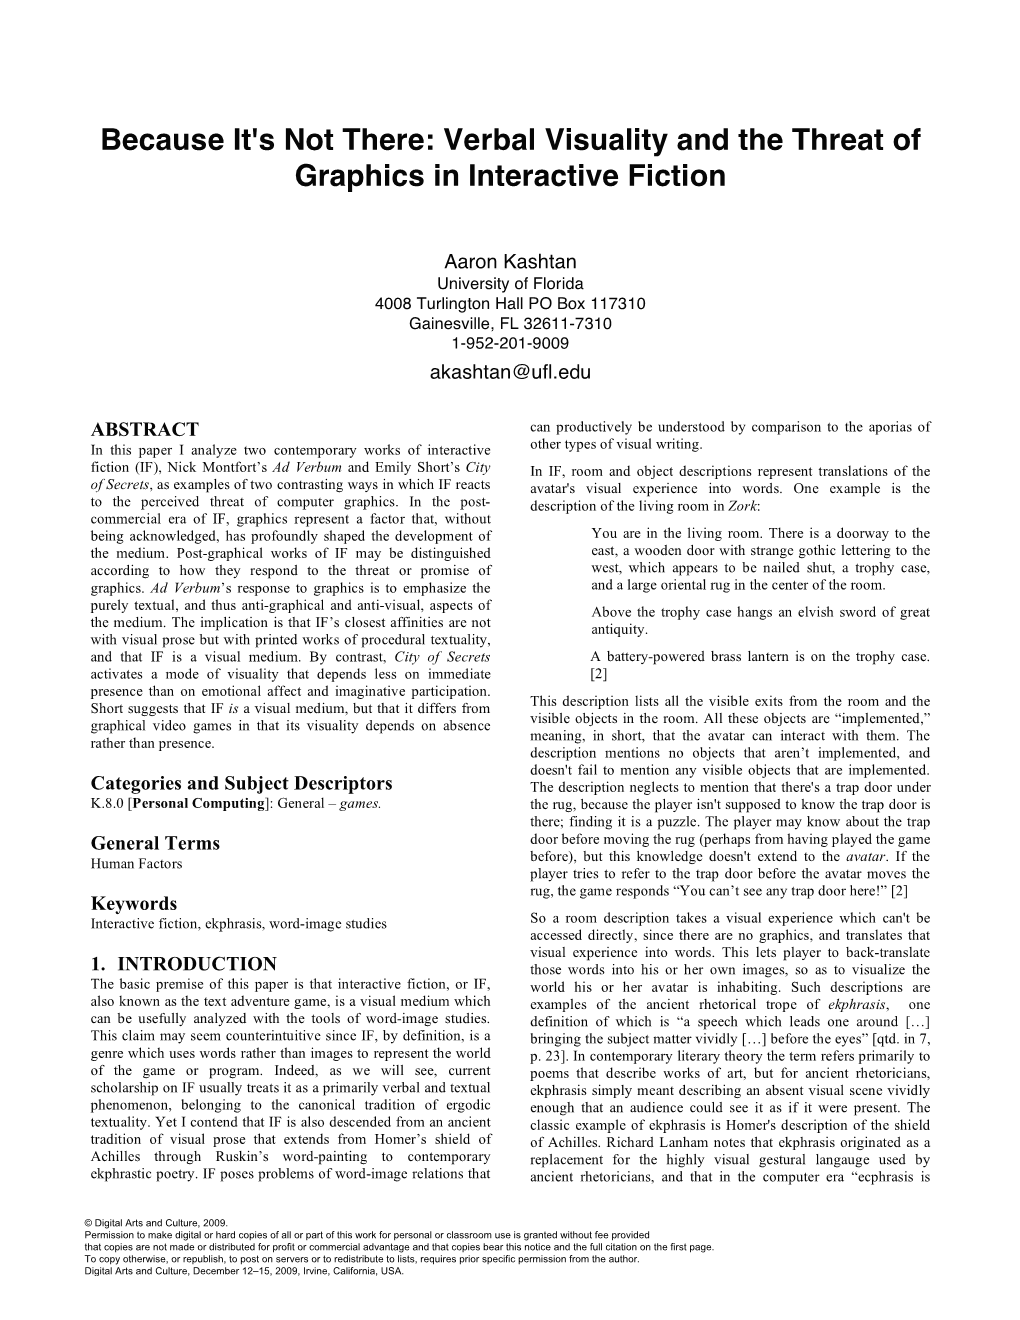 Verbal Visuality and the Threat of Graphics in Interactive Fiction